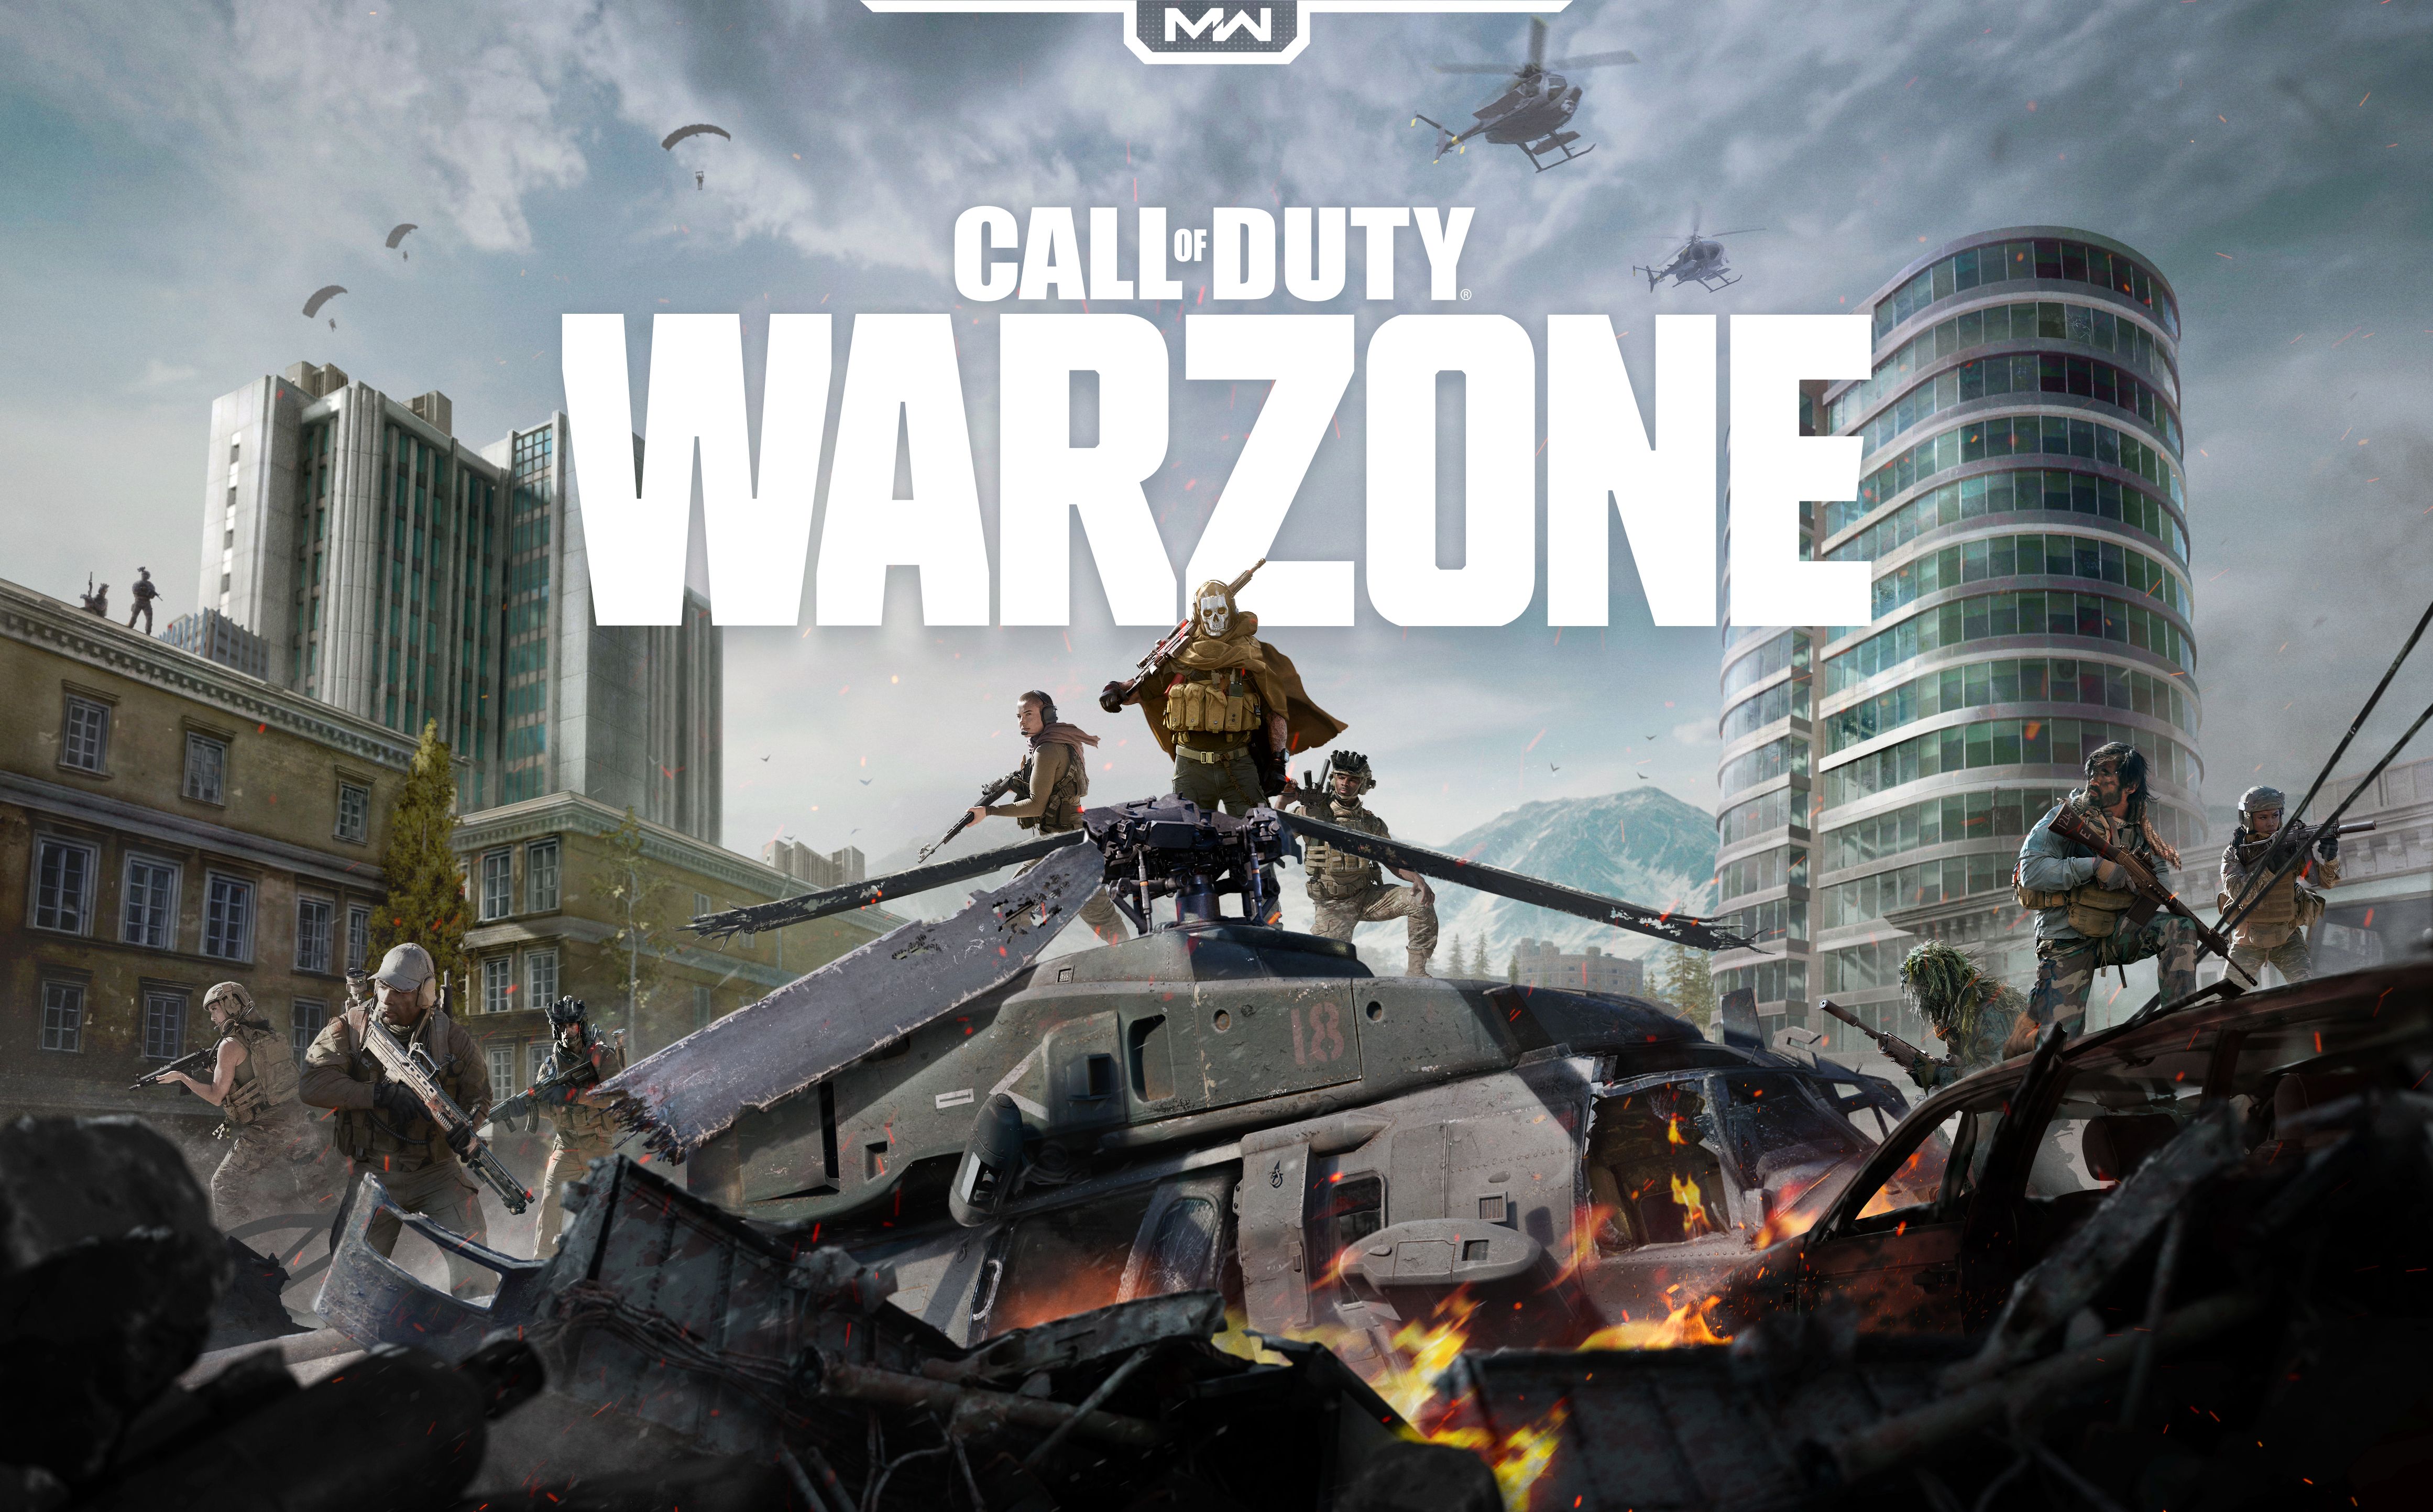 Call of Duty Warzone Poster 4K Wallpaper, HD Games 4K Wallpapers